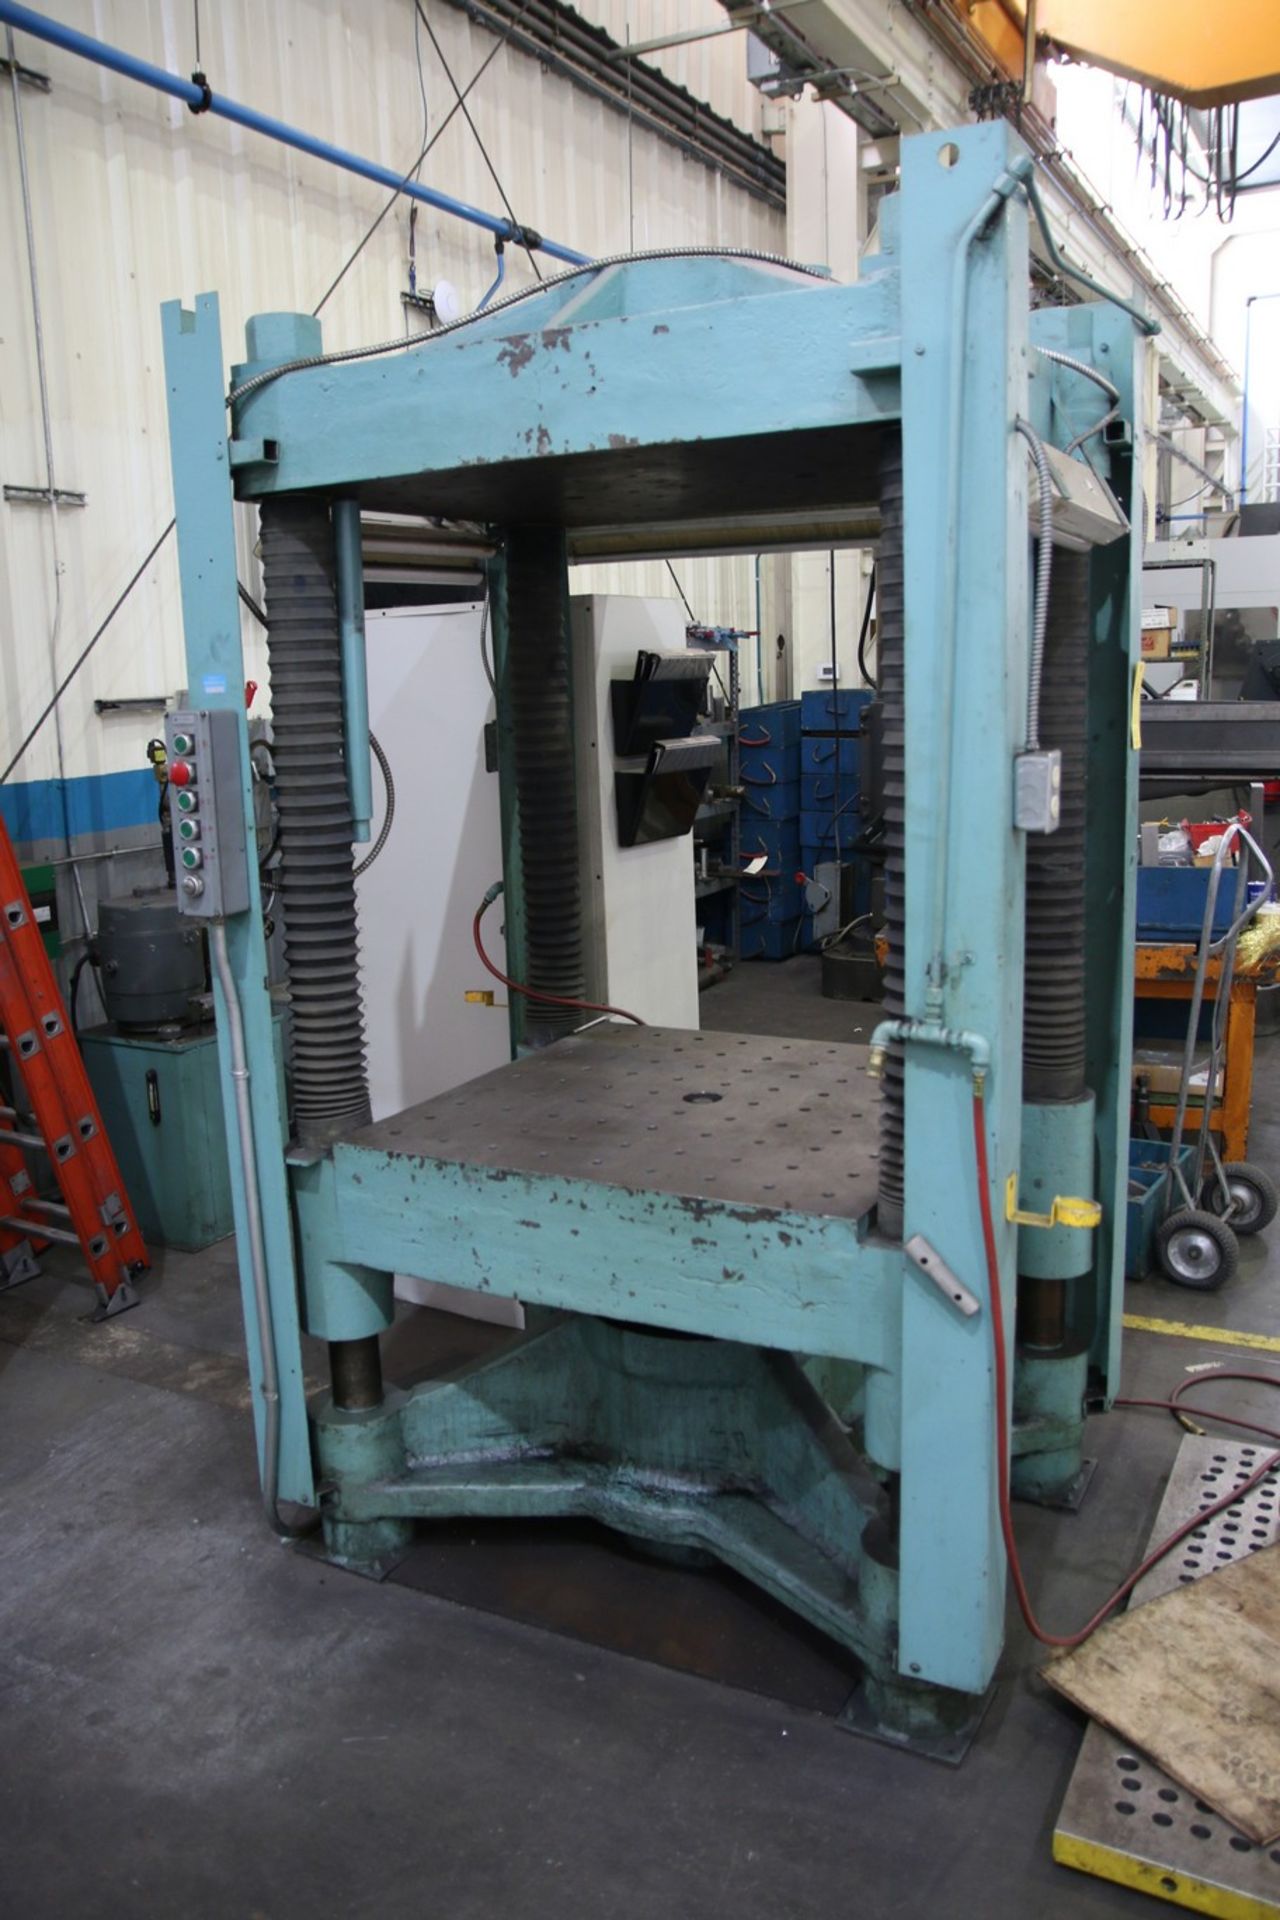 60 Ton 4-Post Hydraulic Spotting Press Includes (1) 15" x 24" and (1) 32" x 48" Setup Table - Image 3 of 6